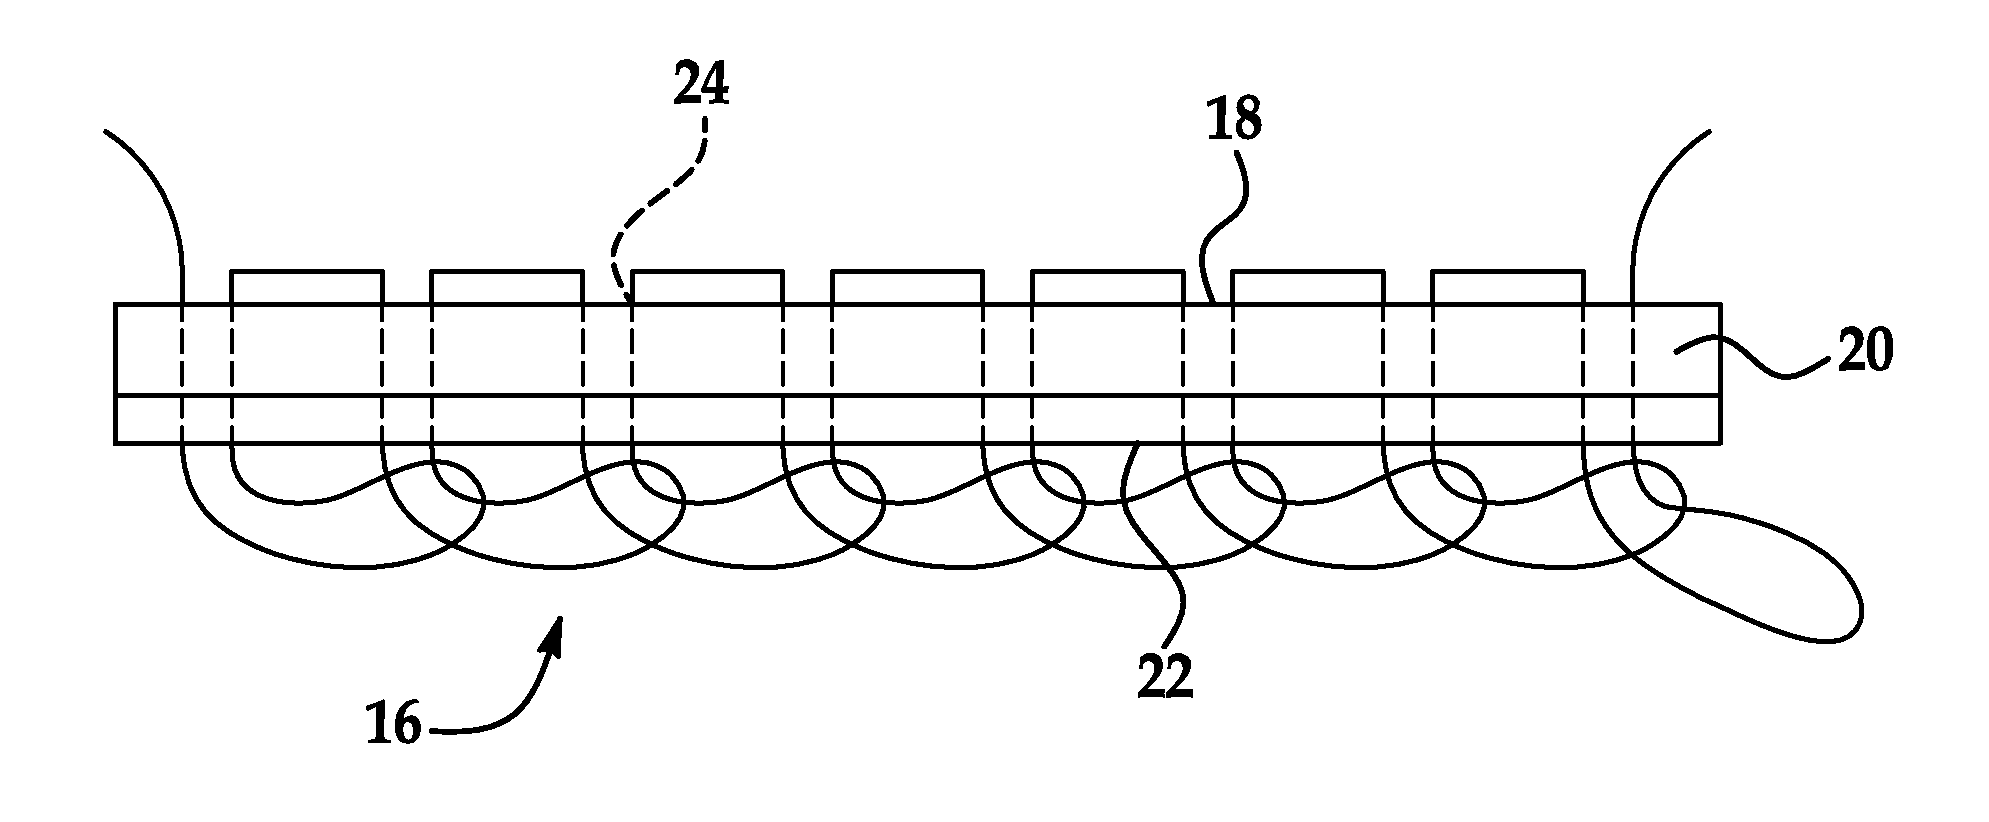 Method for stitching vehicle interior components and components formed from the method